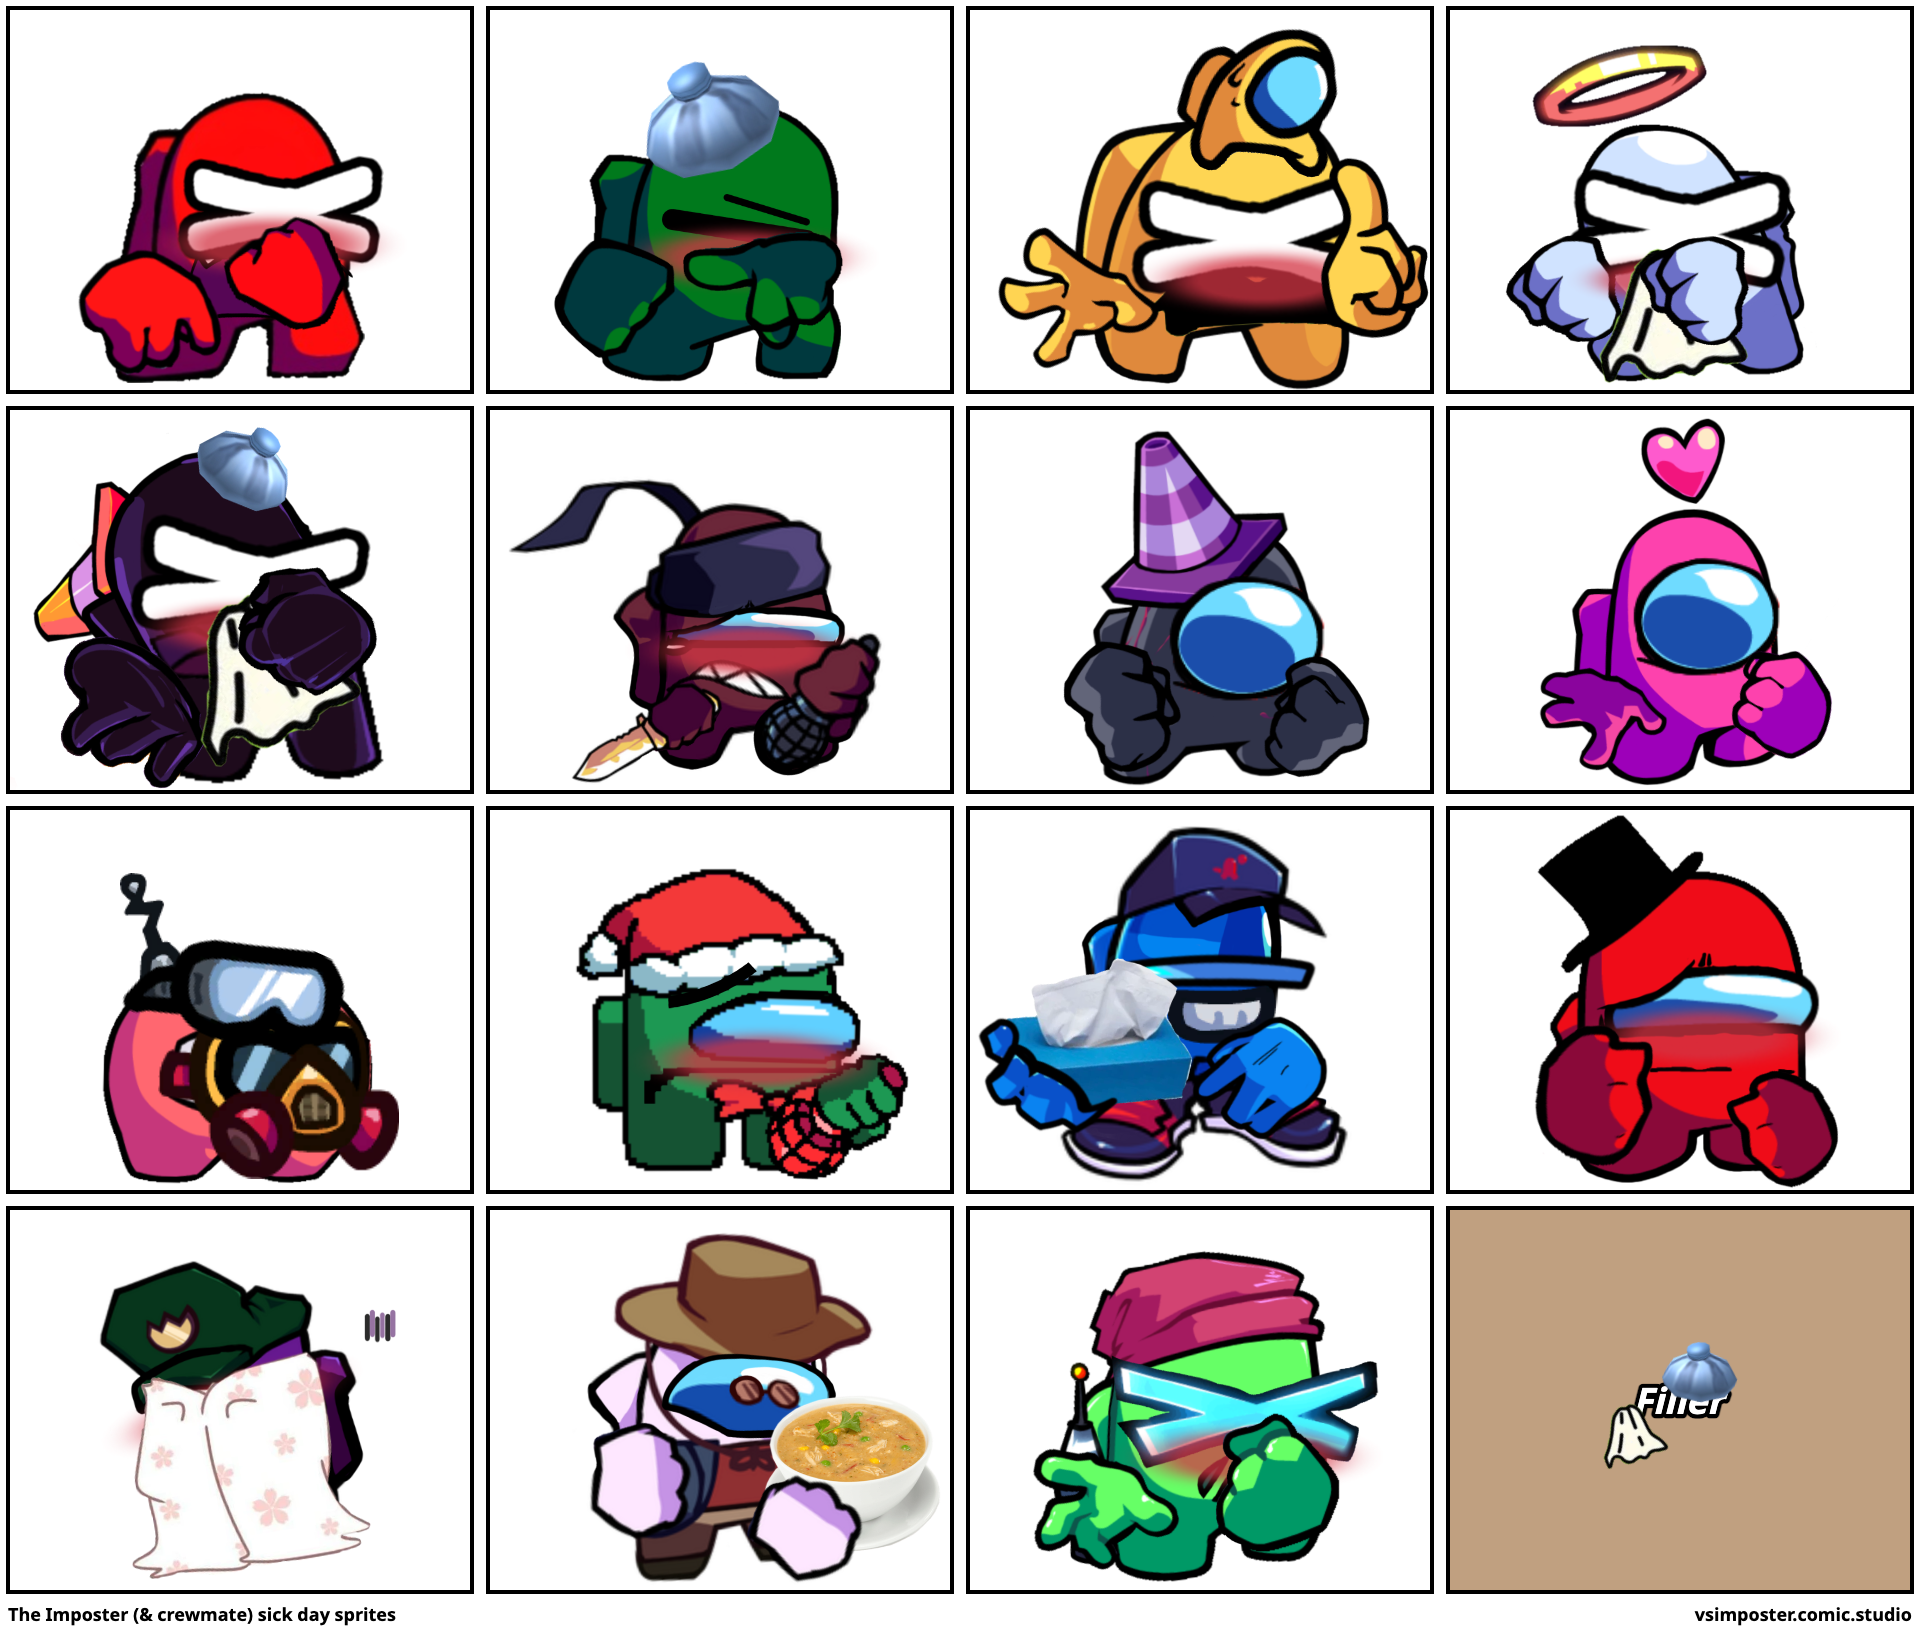 The Imposter (& crewmate) sick day sprites